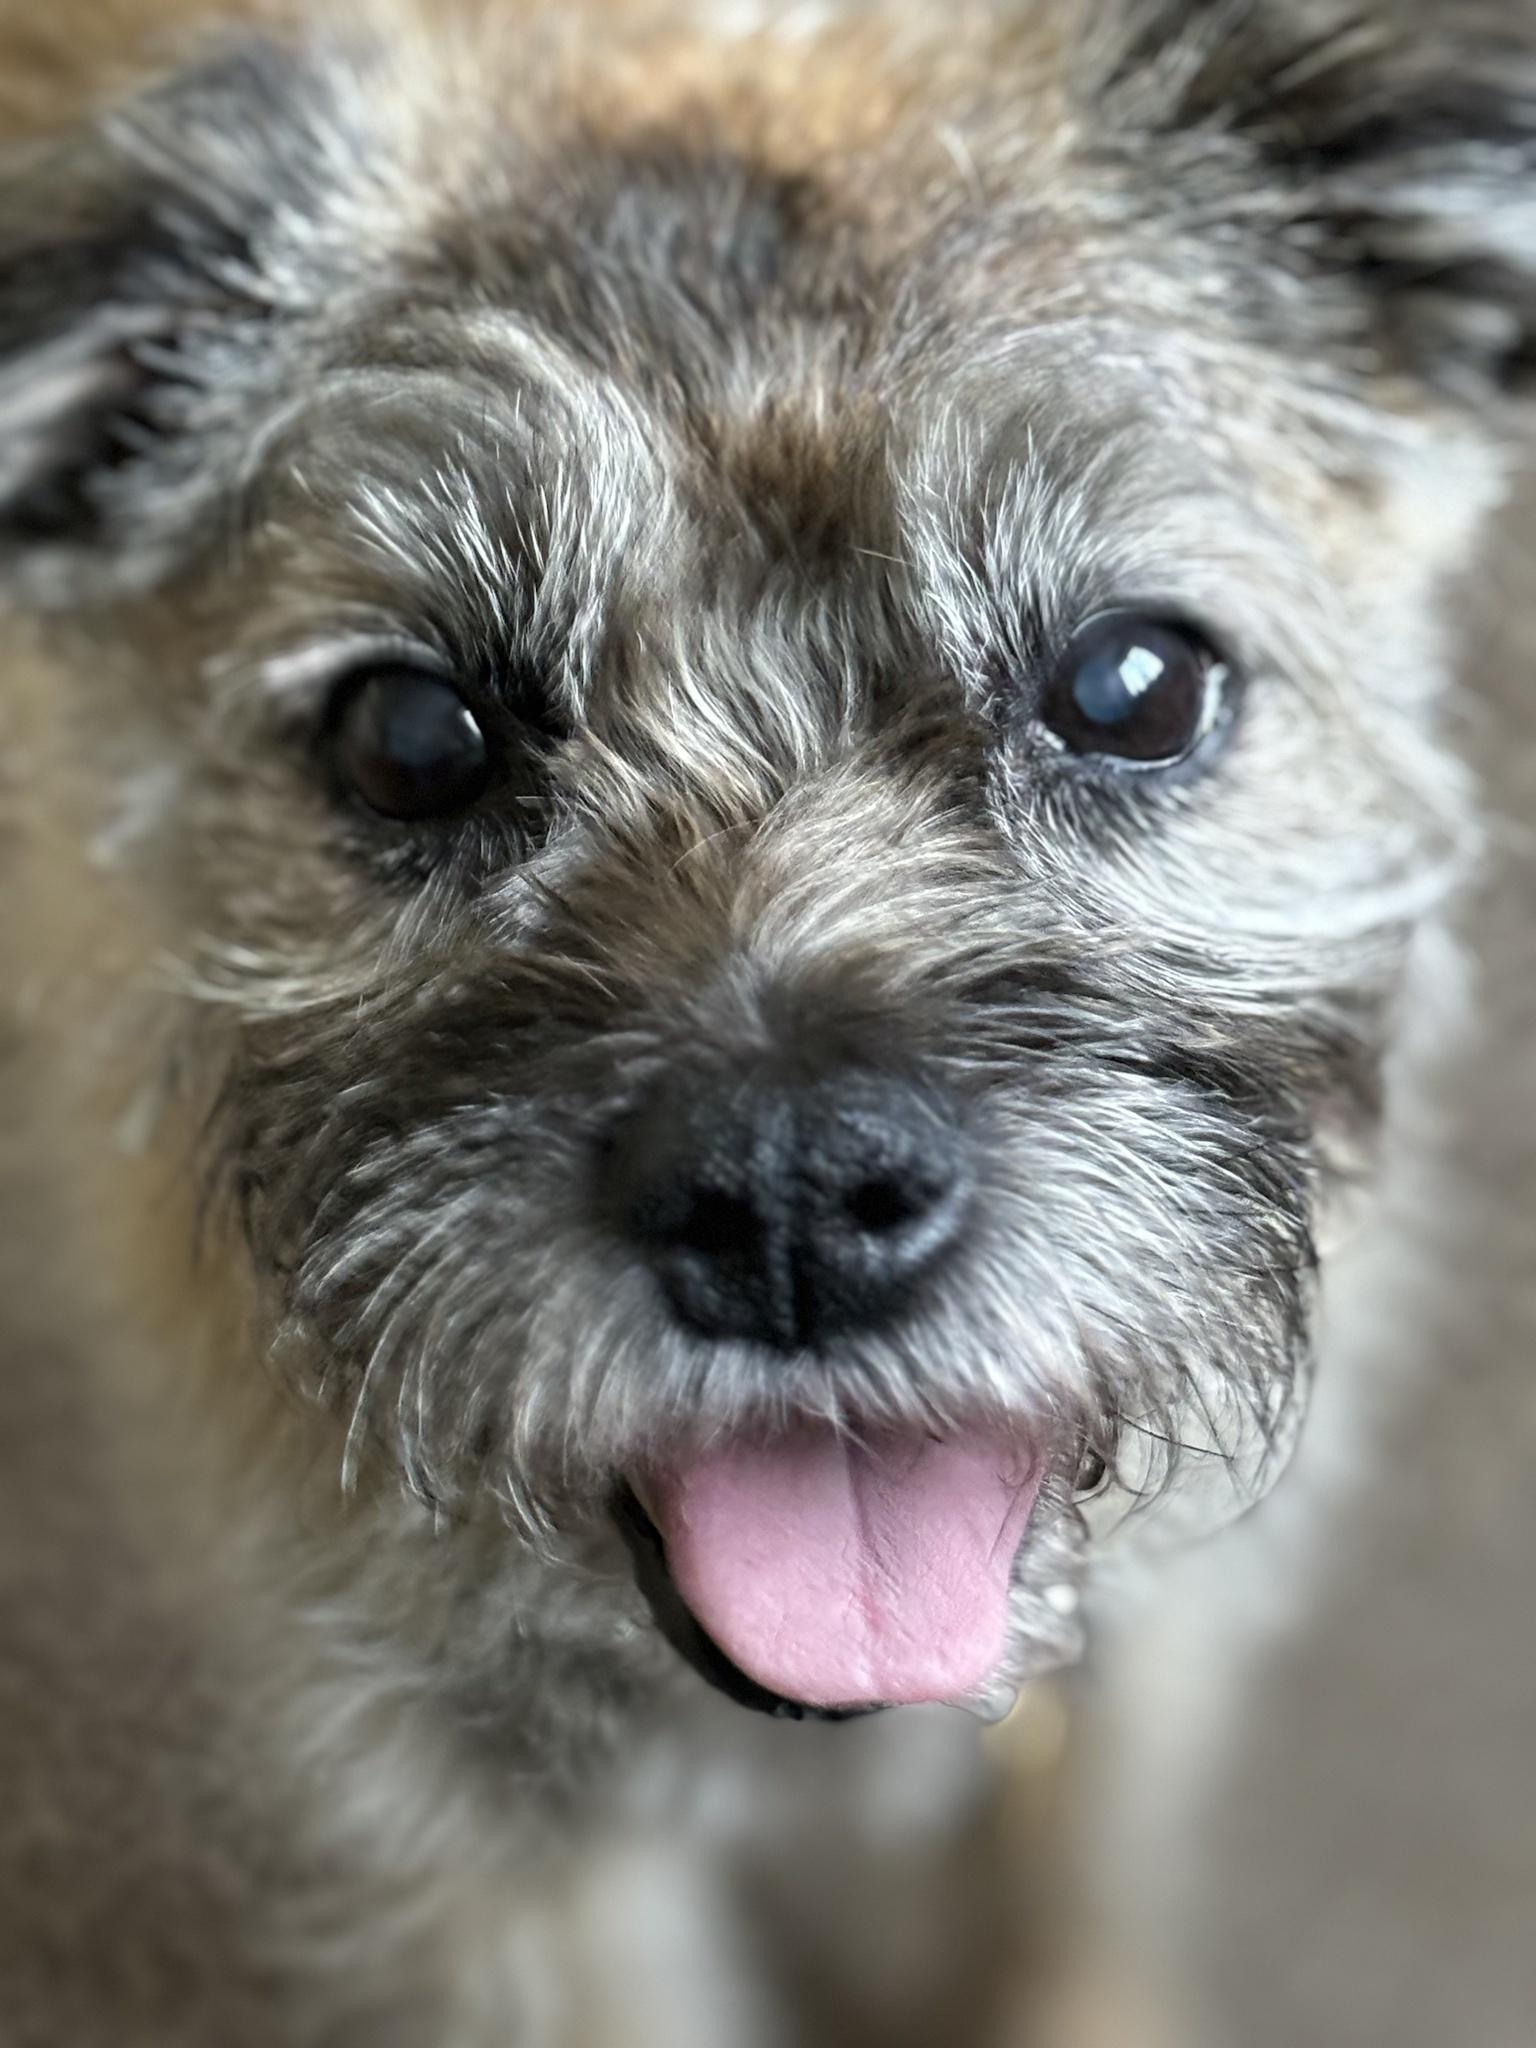 my 12 year former BT feeling much better this day